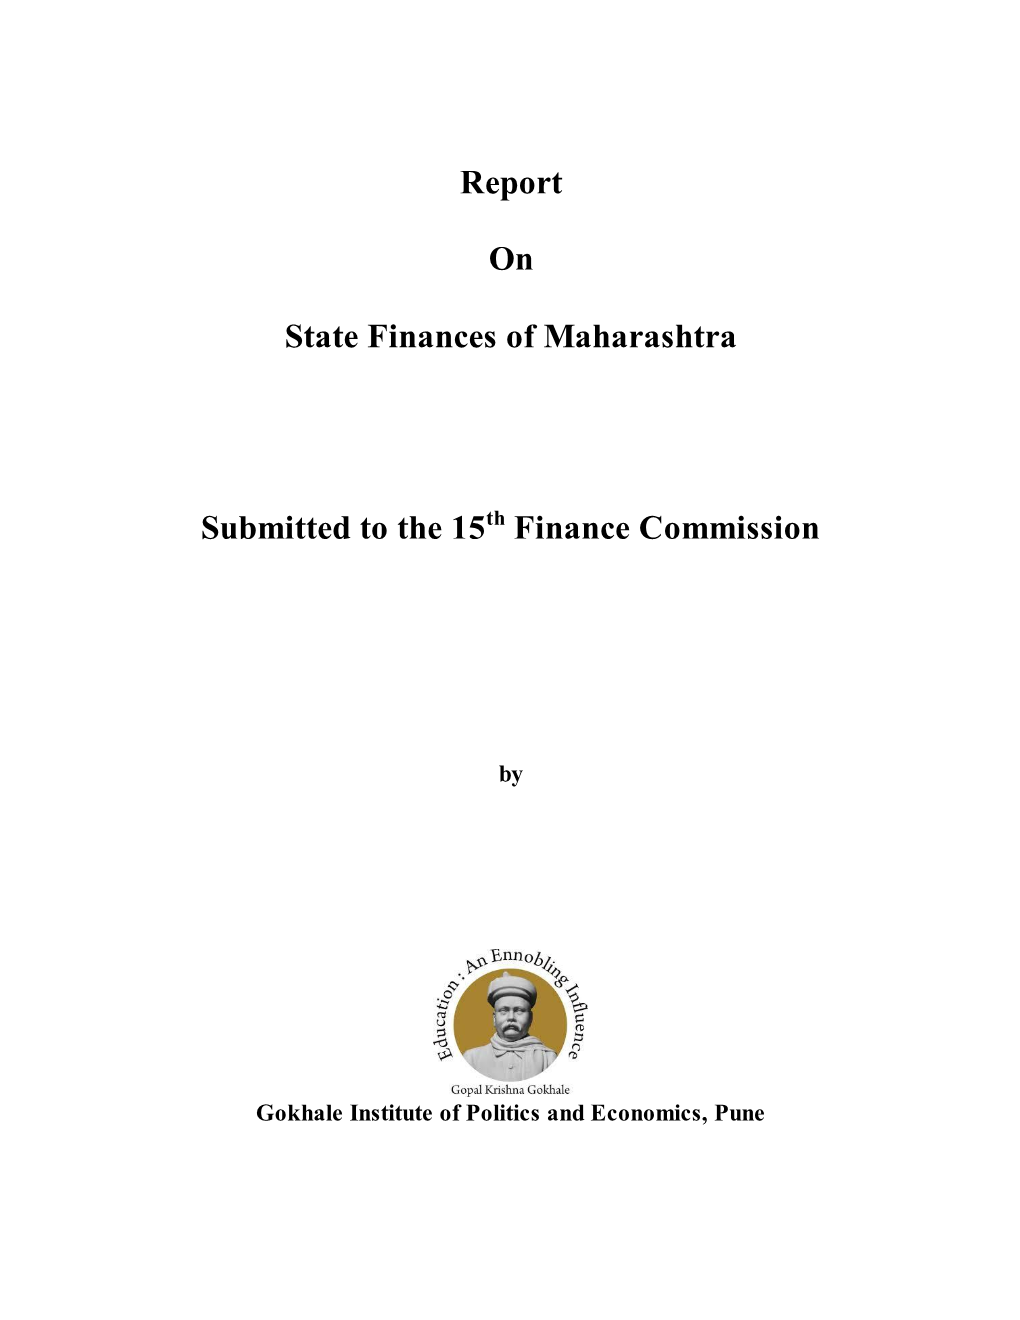 Report on State Finances of Maharashtra Submitted to the 15